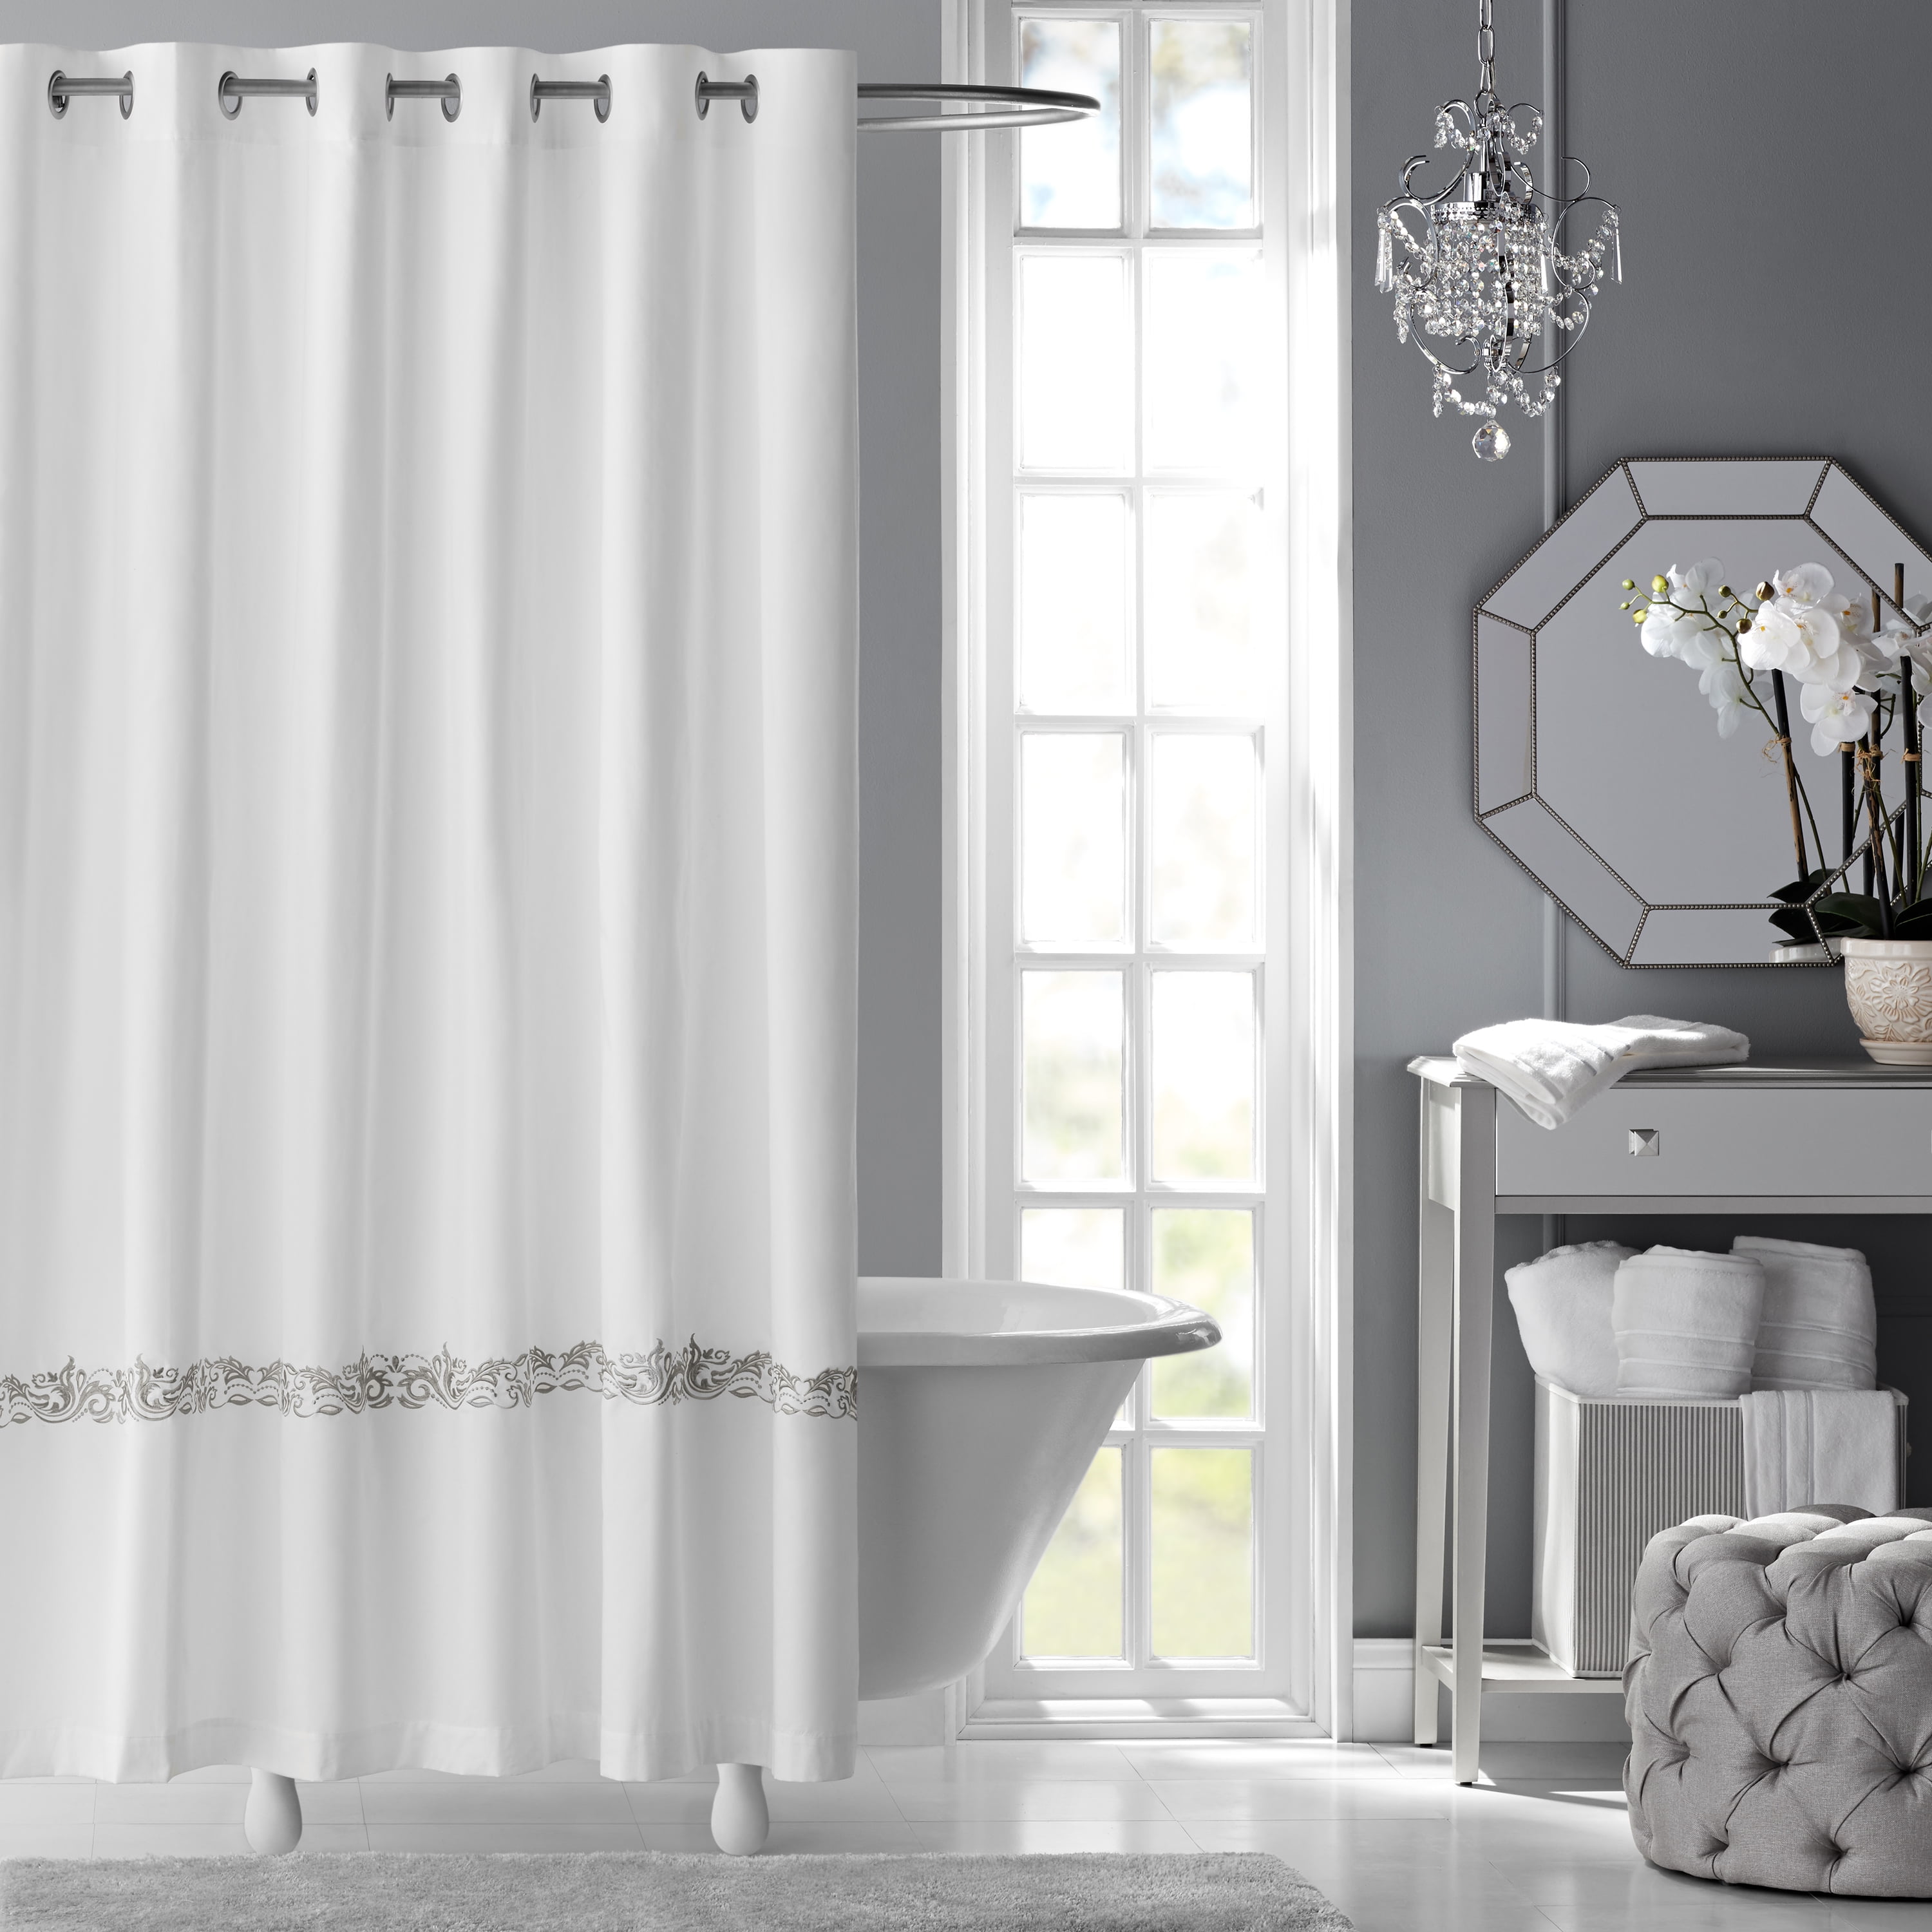 Hotel Style Fresca Embroidered Fabric Shower Curtain - Walmart.com